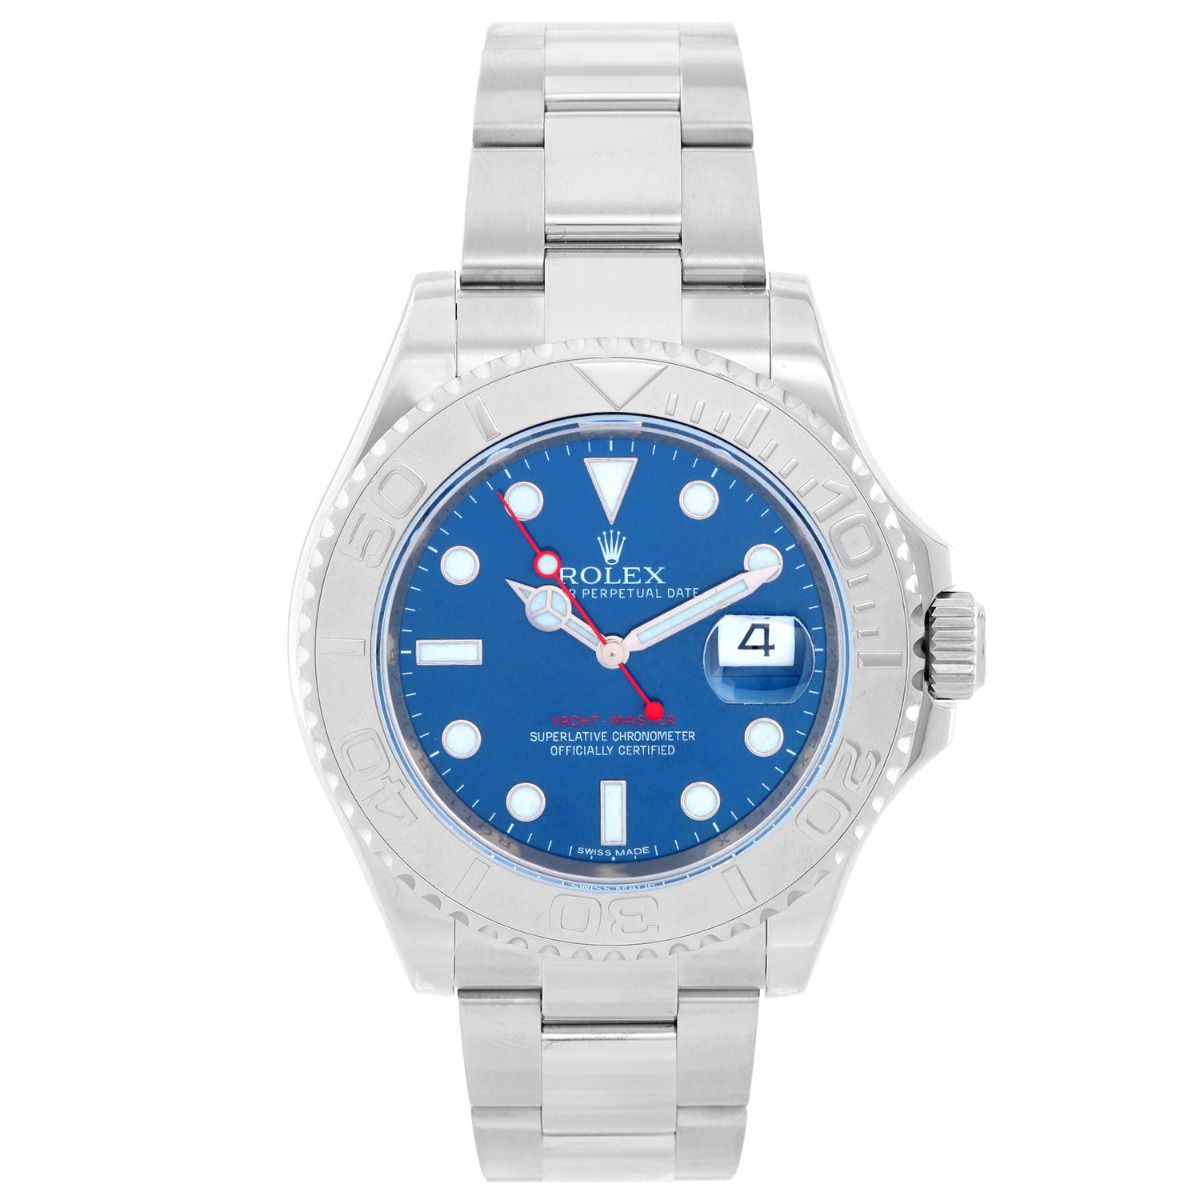 Rolex 116622 yacht master steel and platinum blue dial